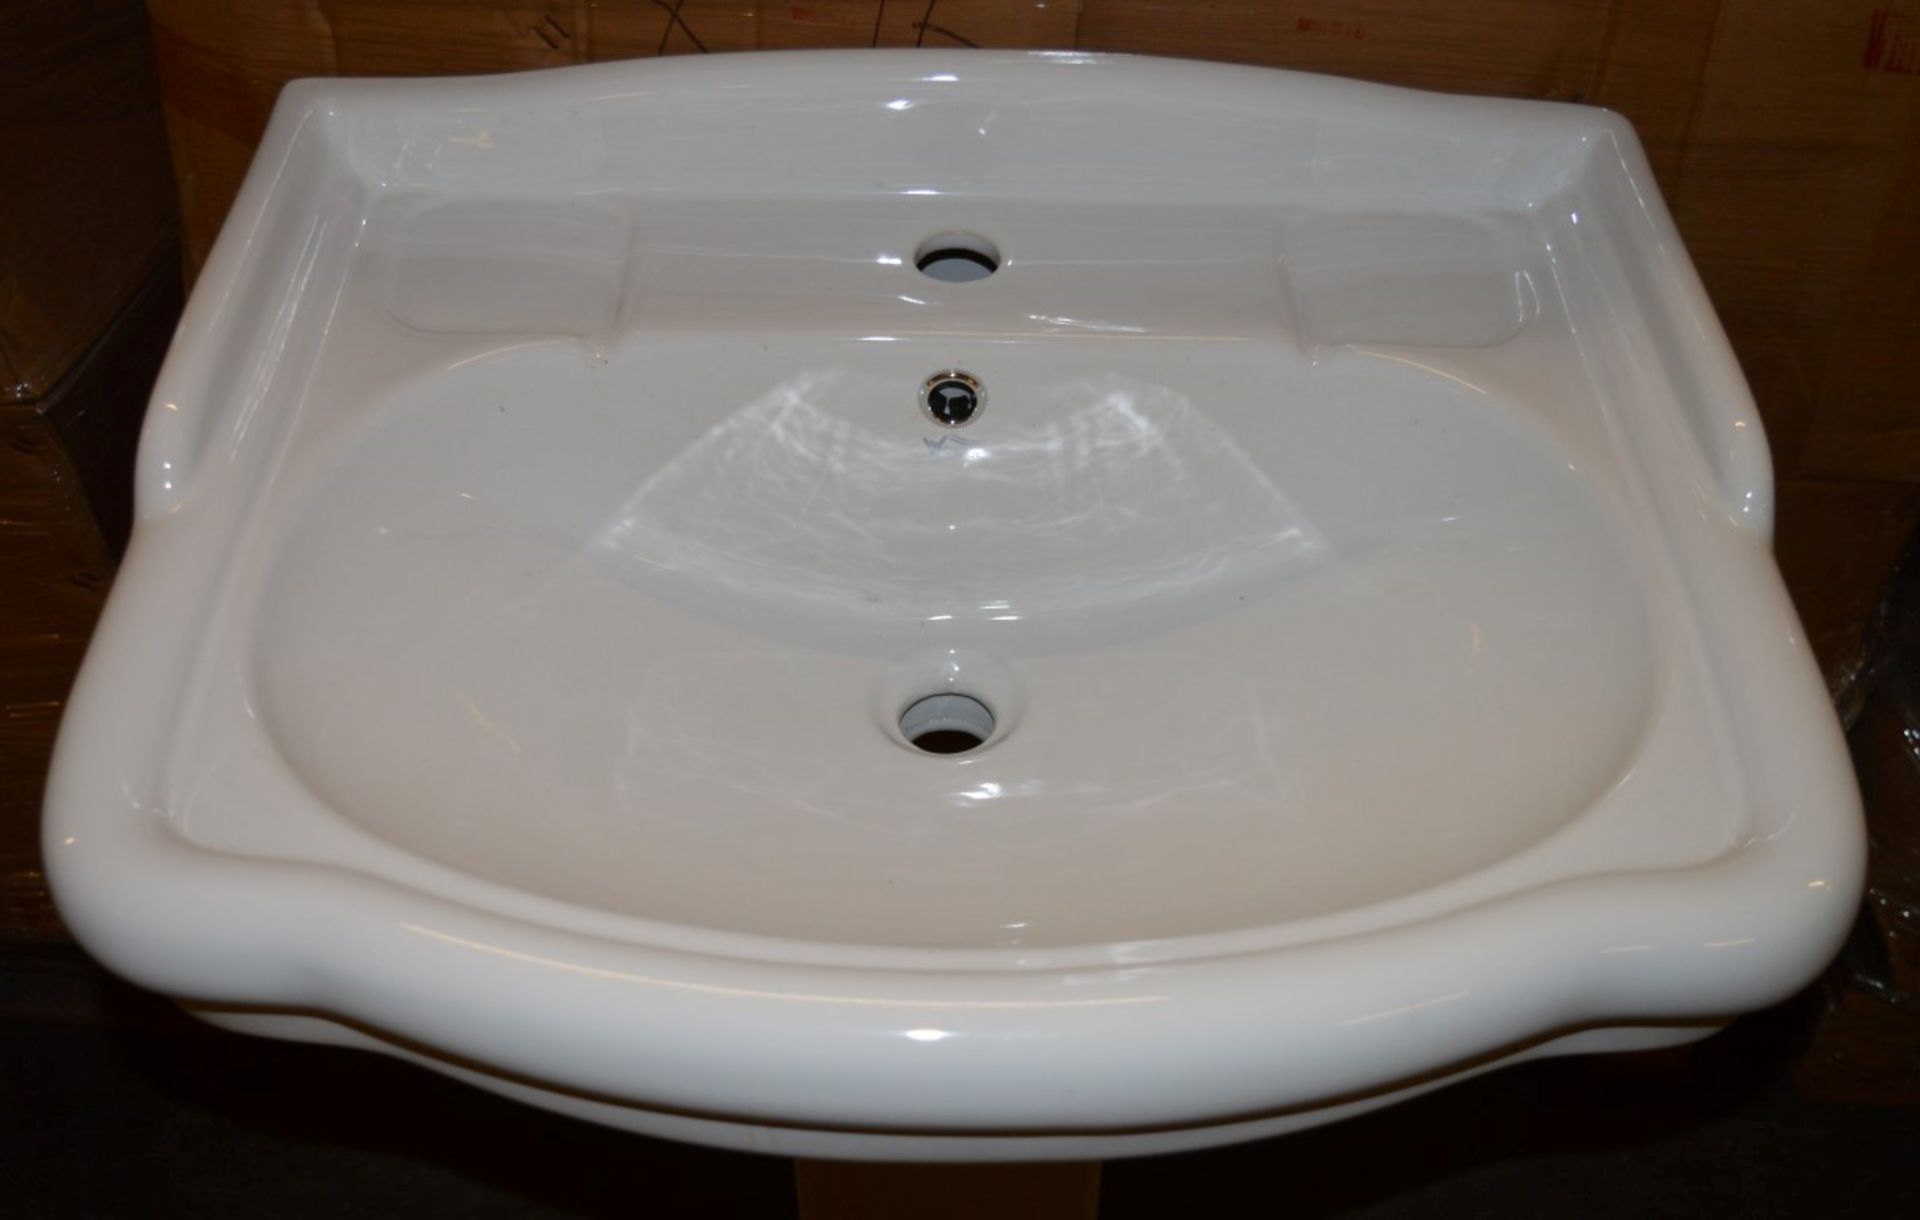 1 x Vogue Bathrooms AUBURY Single Tap Hole SINK BASIN With Pedestal - 580mm Width - Brand New - Image 3 of 6